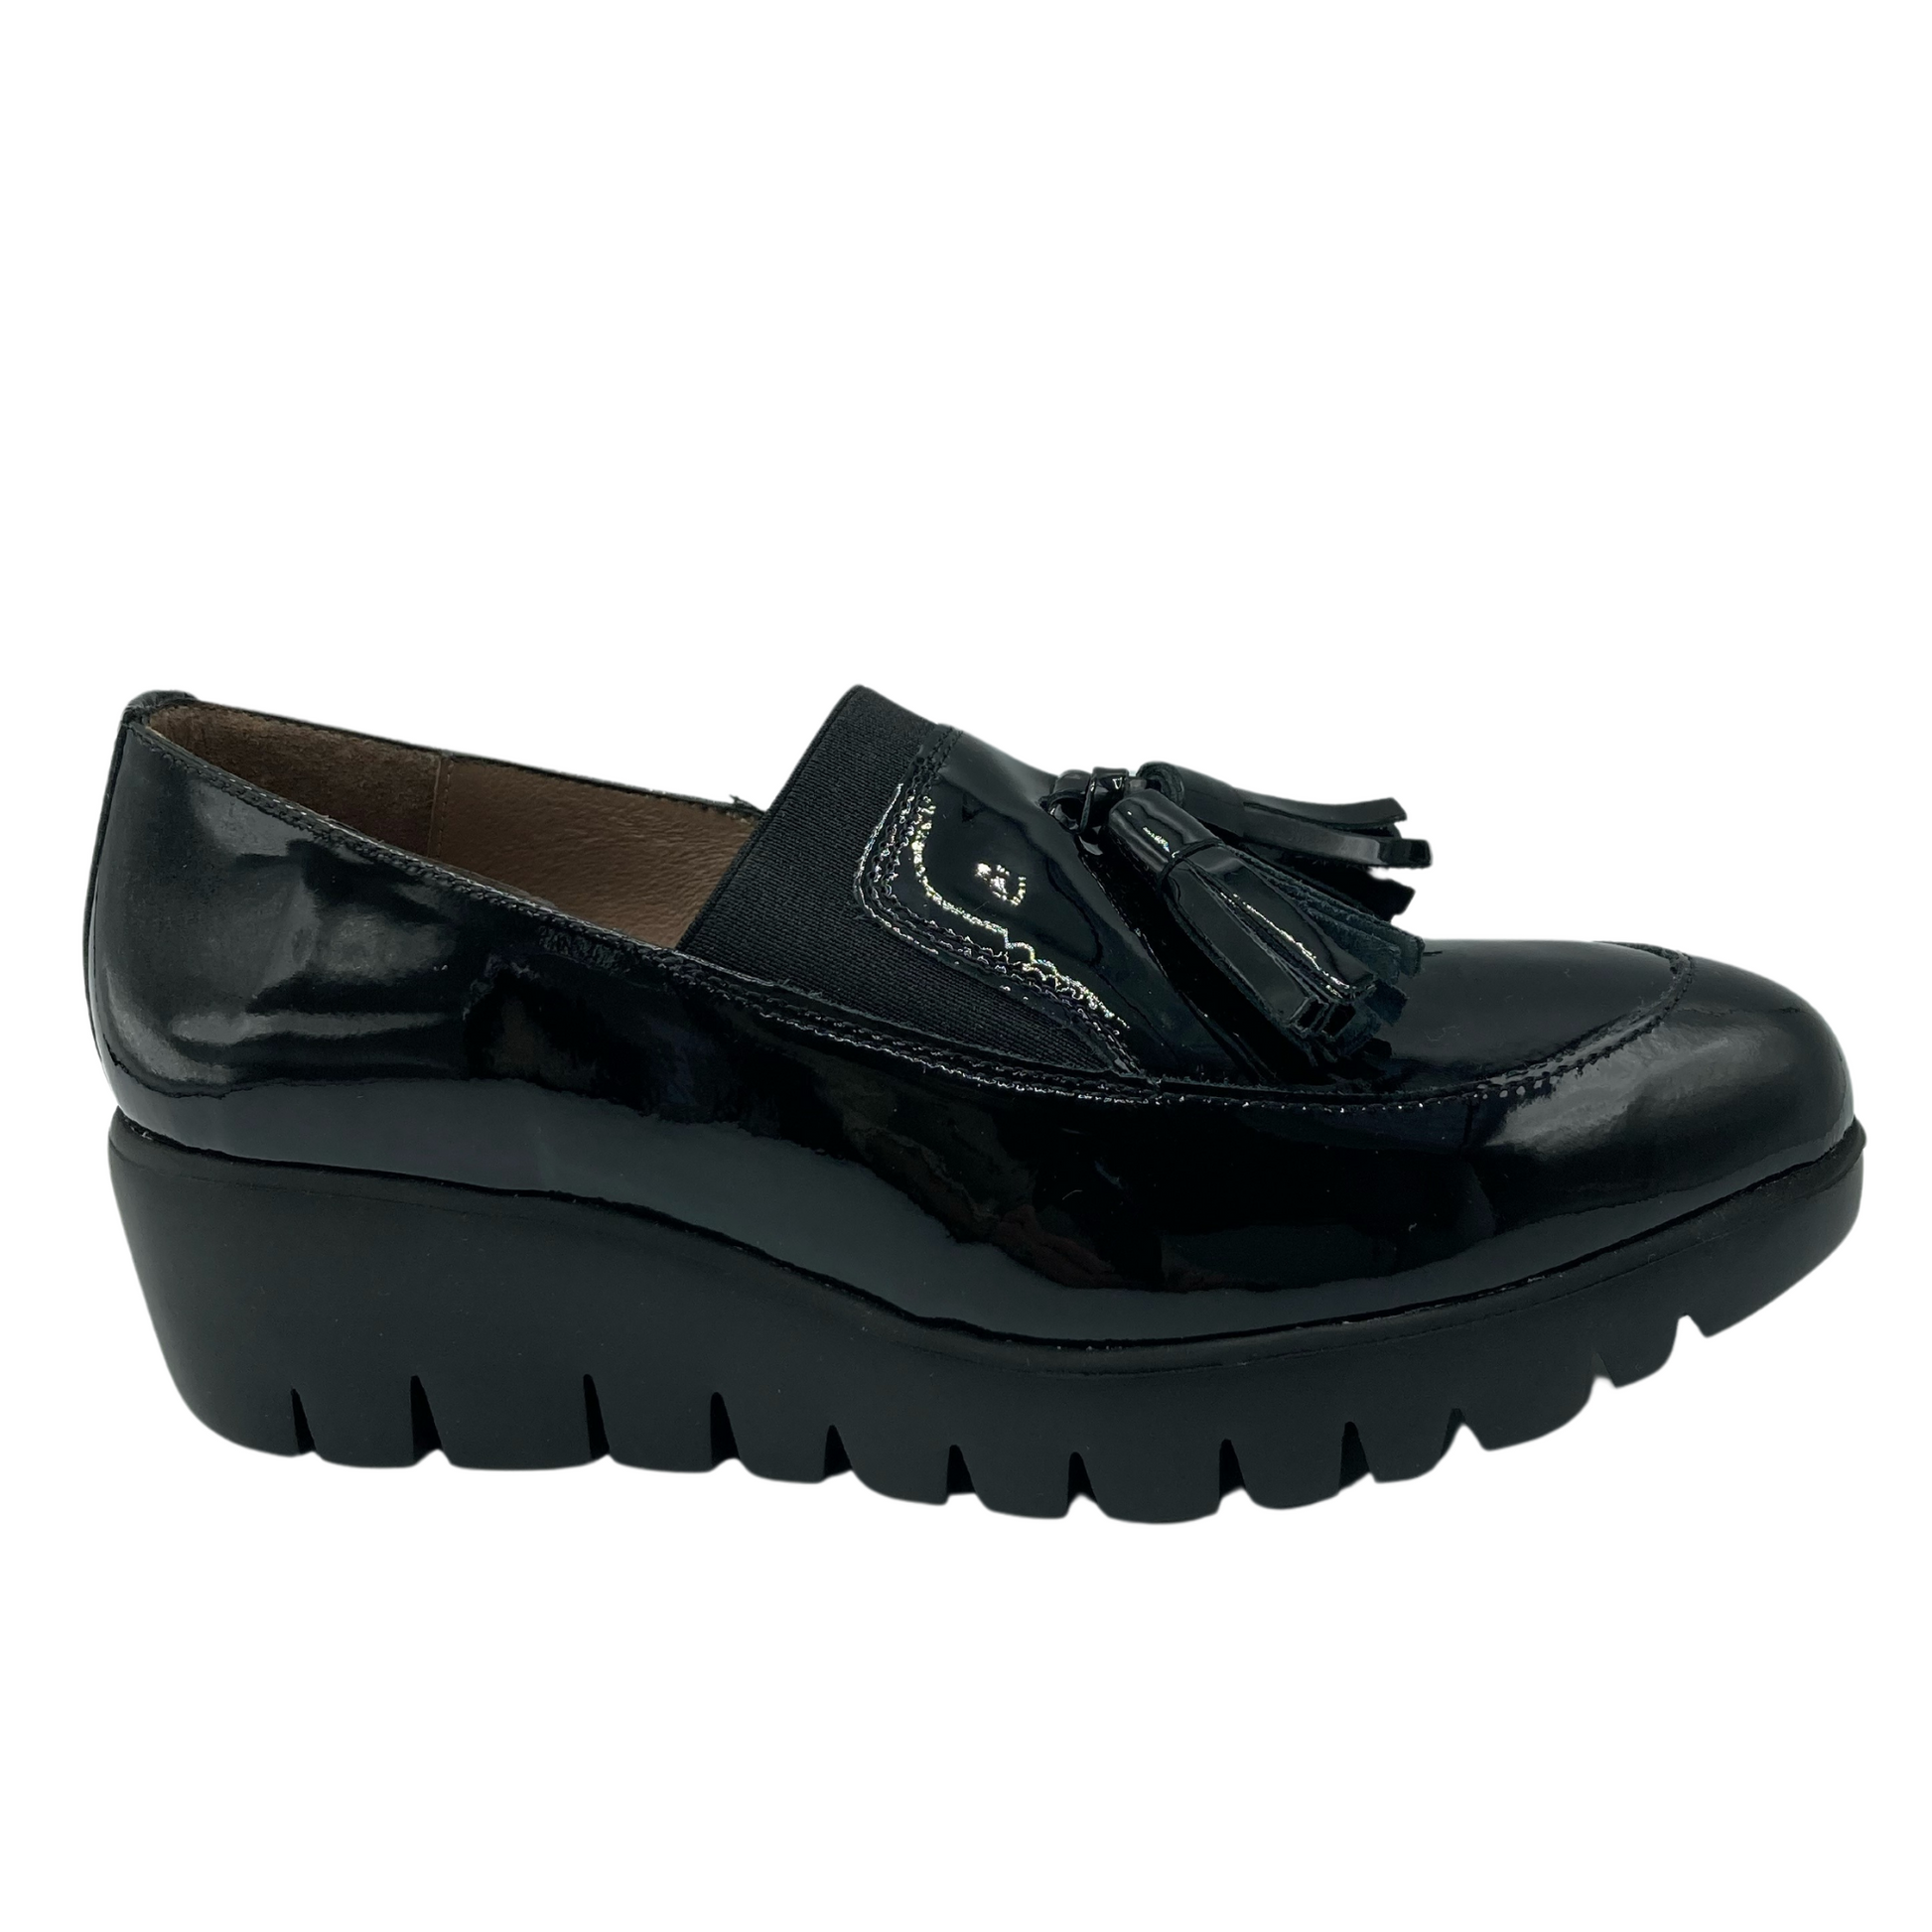 Right facing view of black patent leather wedge loafer with tassels on the toe box